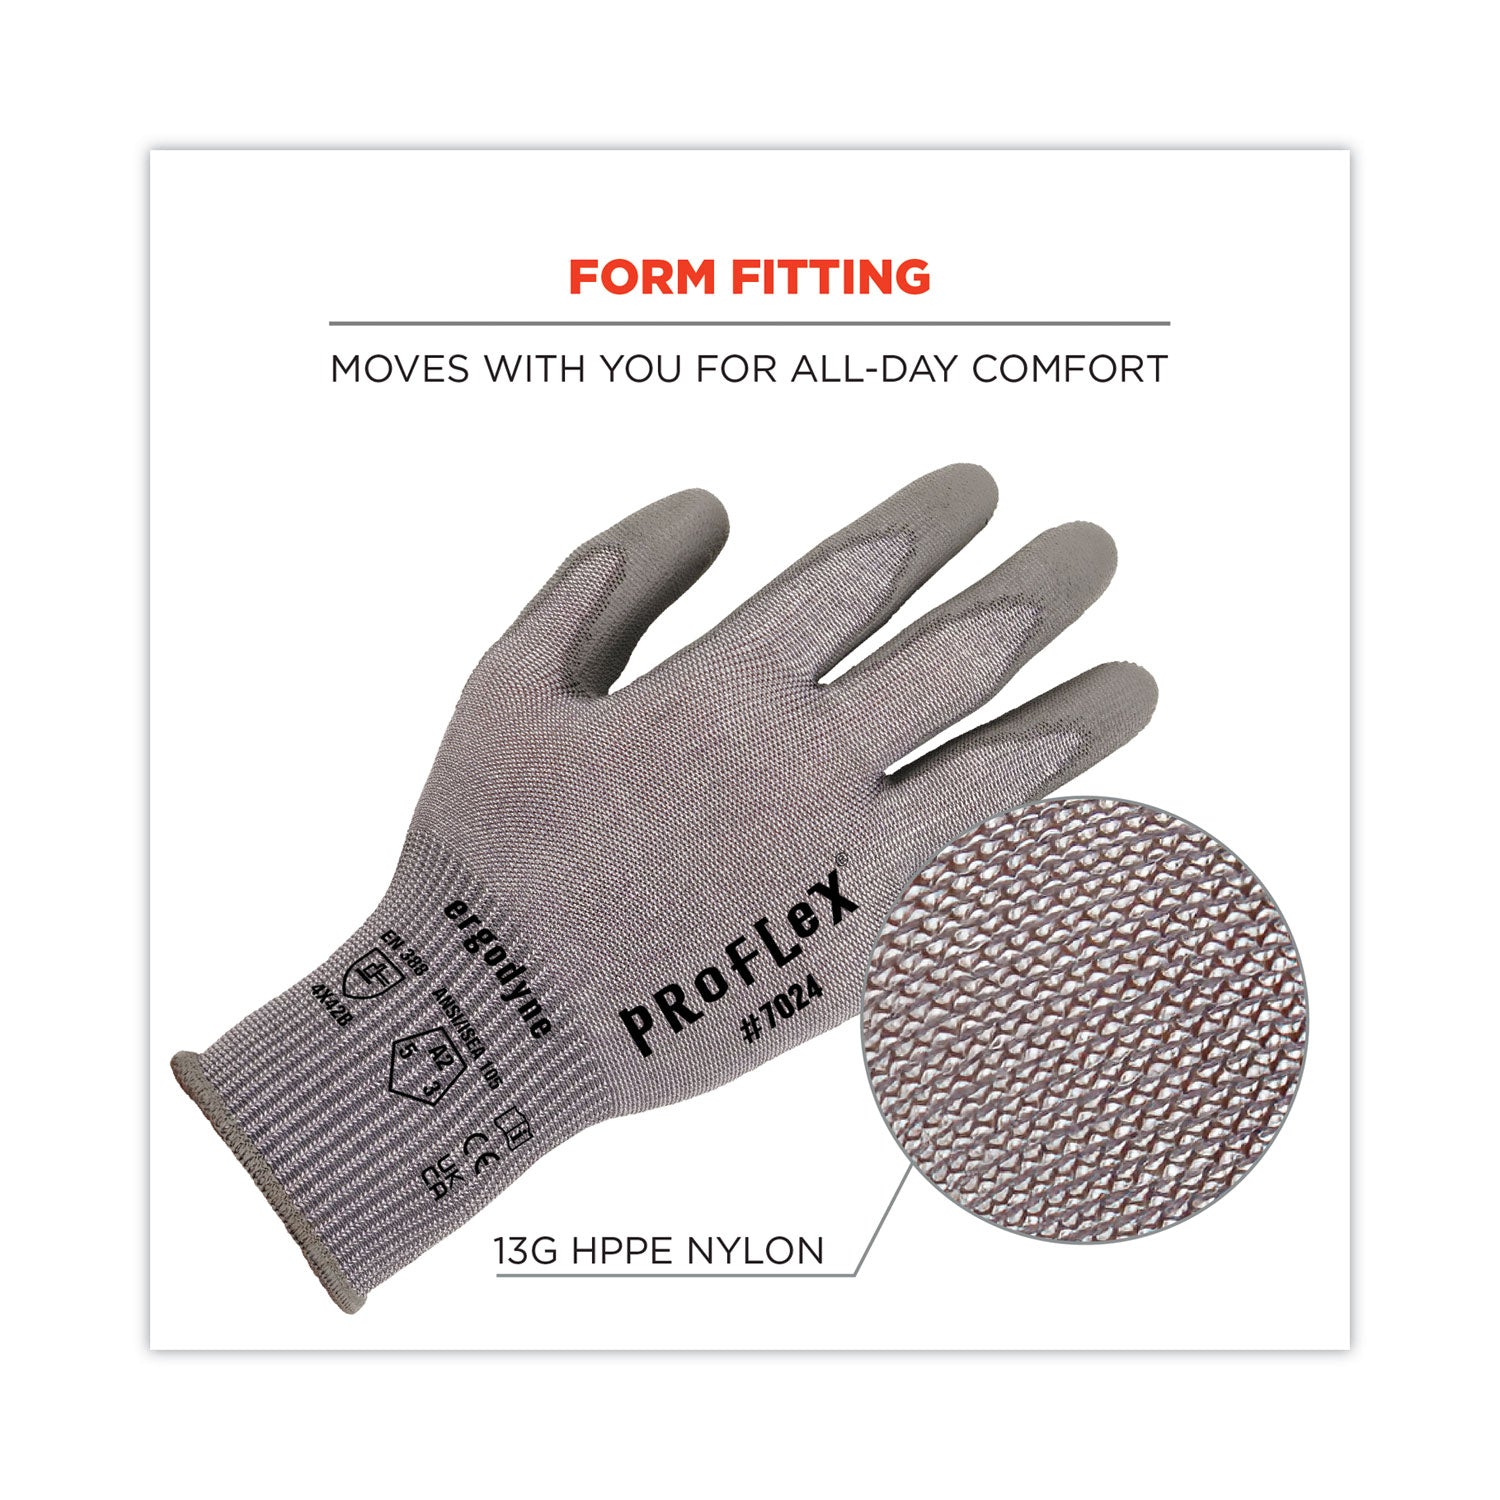 proflex-7024-ansi-a2-pu-coated-cr-gloves-gray-2x-large-12-pairs-pack-ships-in-1-3-business-days_ego10396 - 2